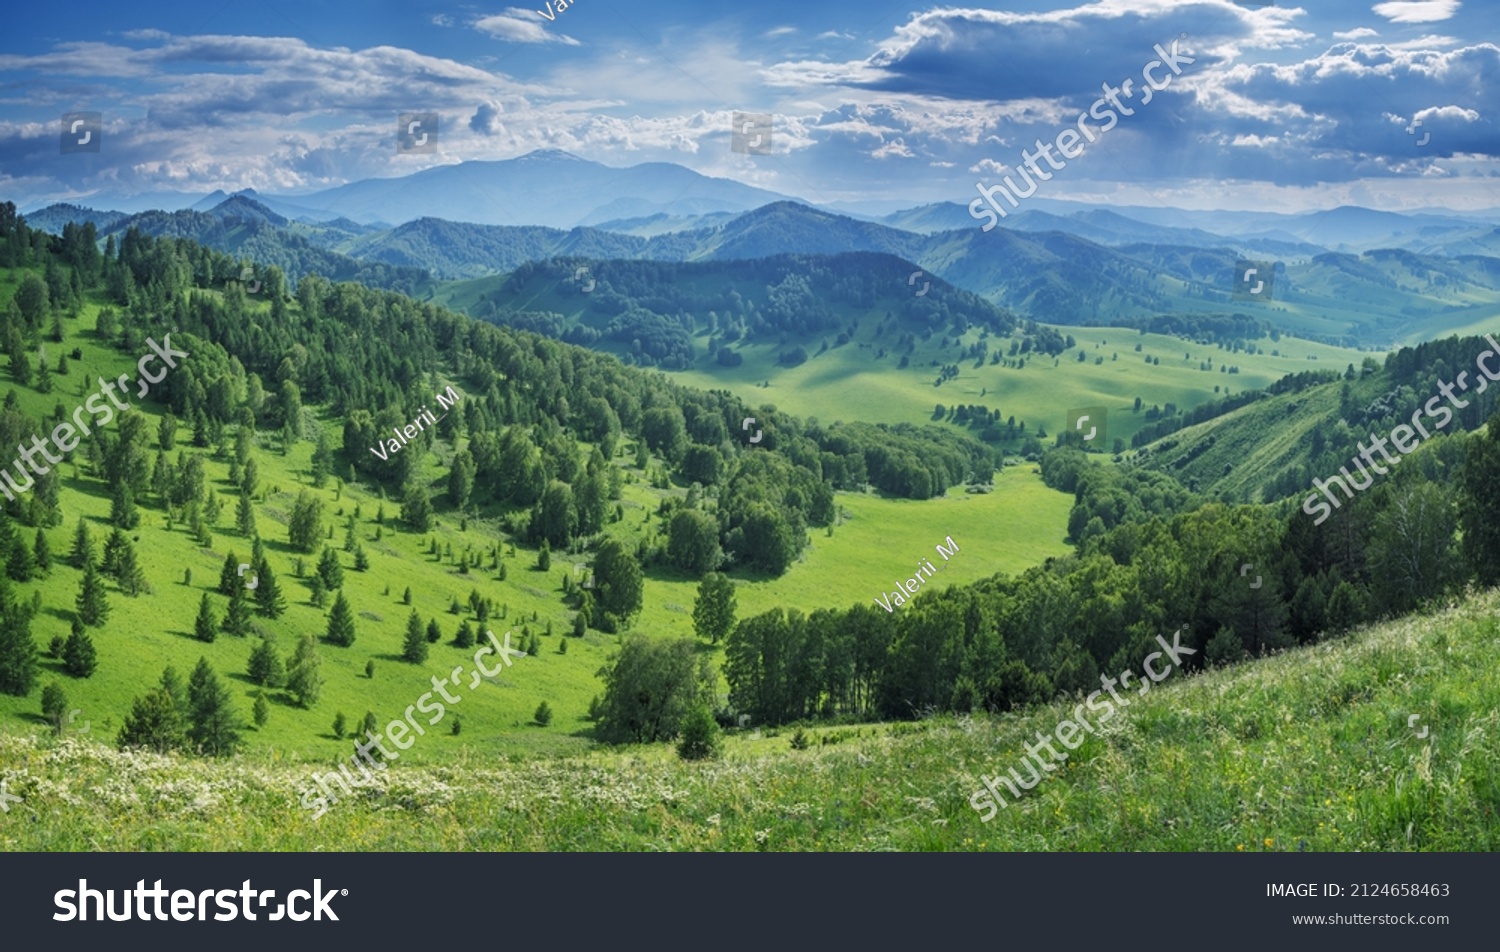 Picturesque valley, mountain view. Bright sunlight, spring greens of forests and meadows. #2124658463